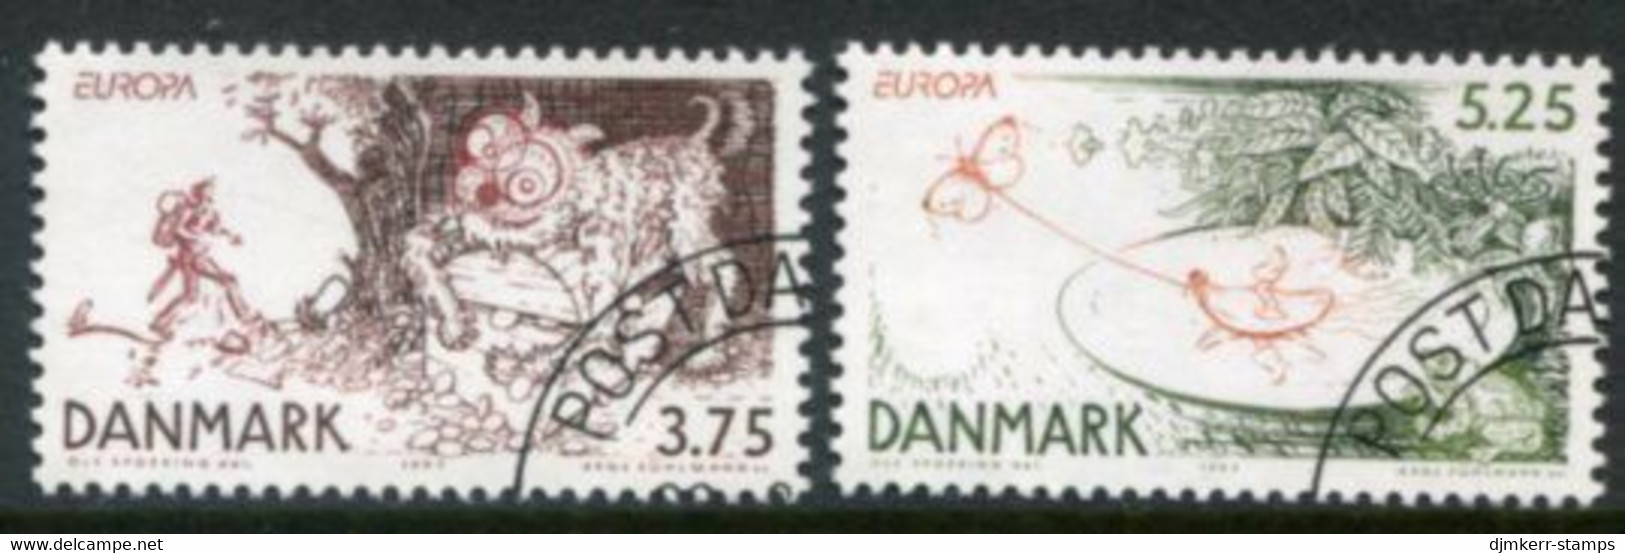 DENMARK 1997 Europa: Sagas And Legends Used.  Michel 1162-63 - Usati